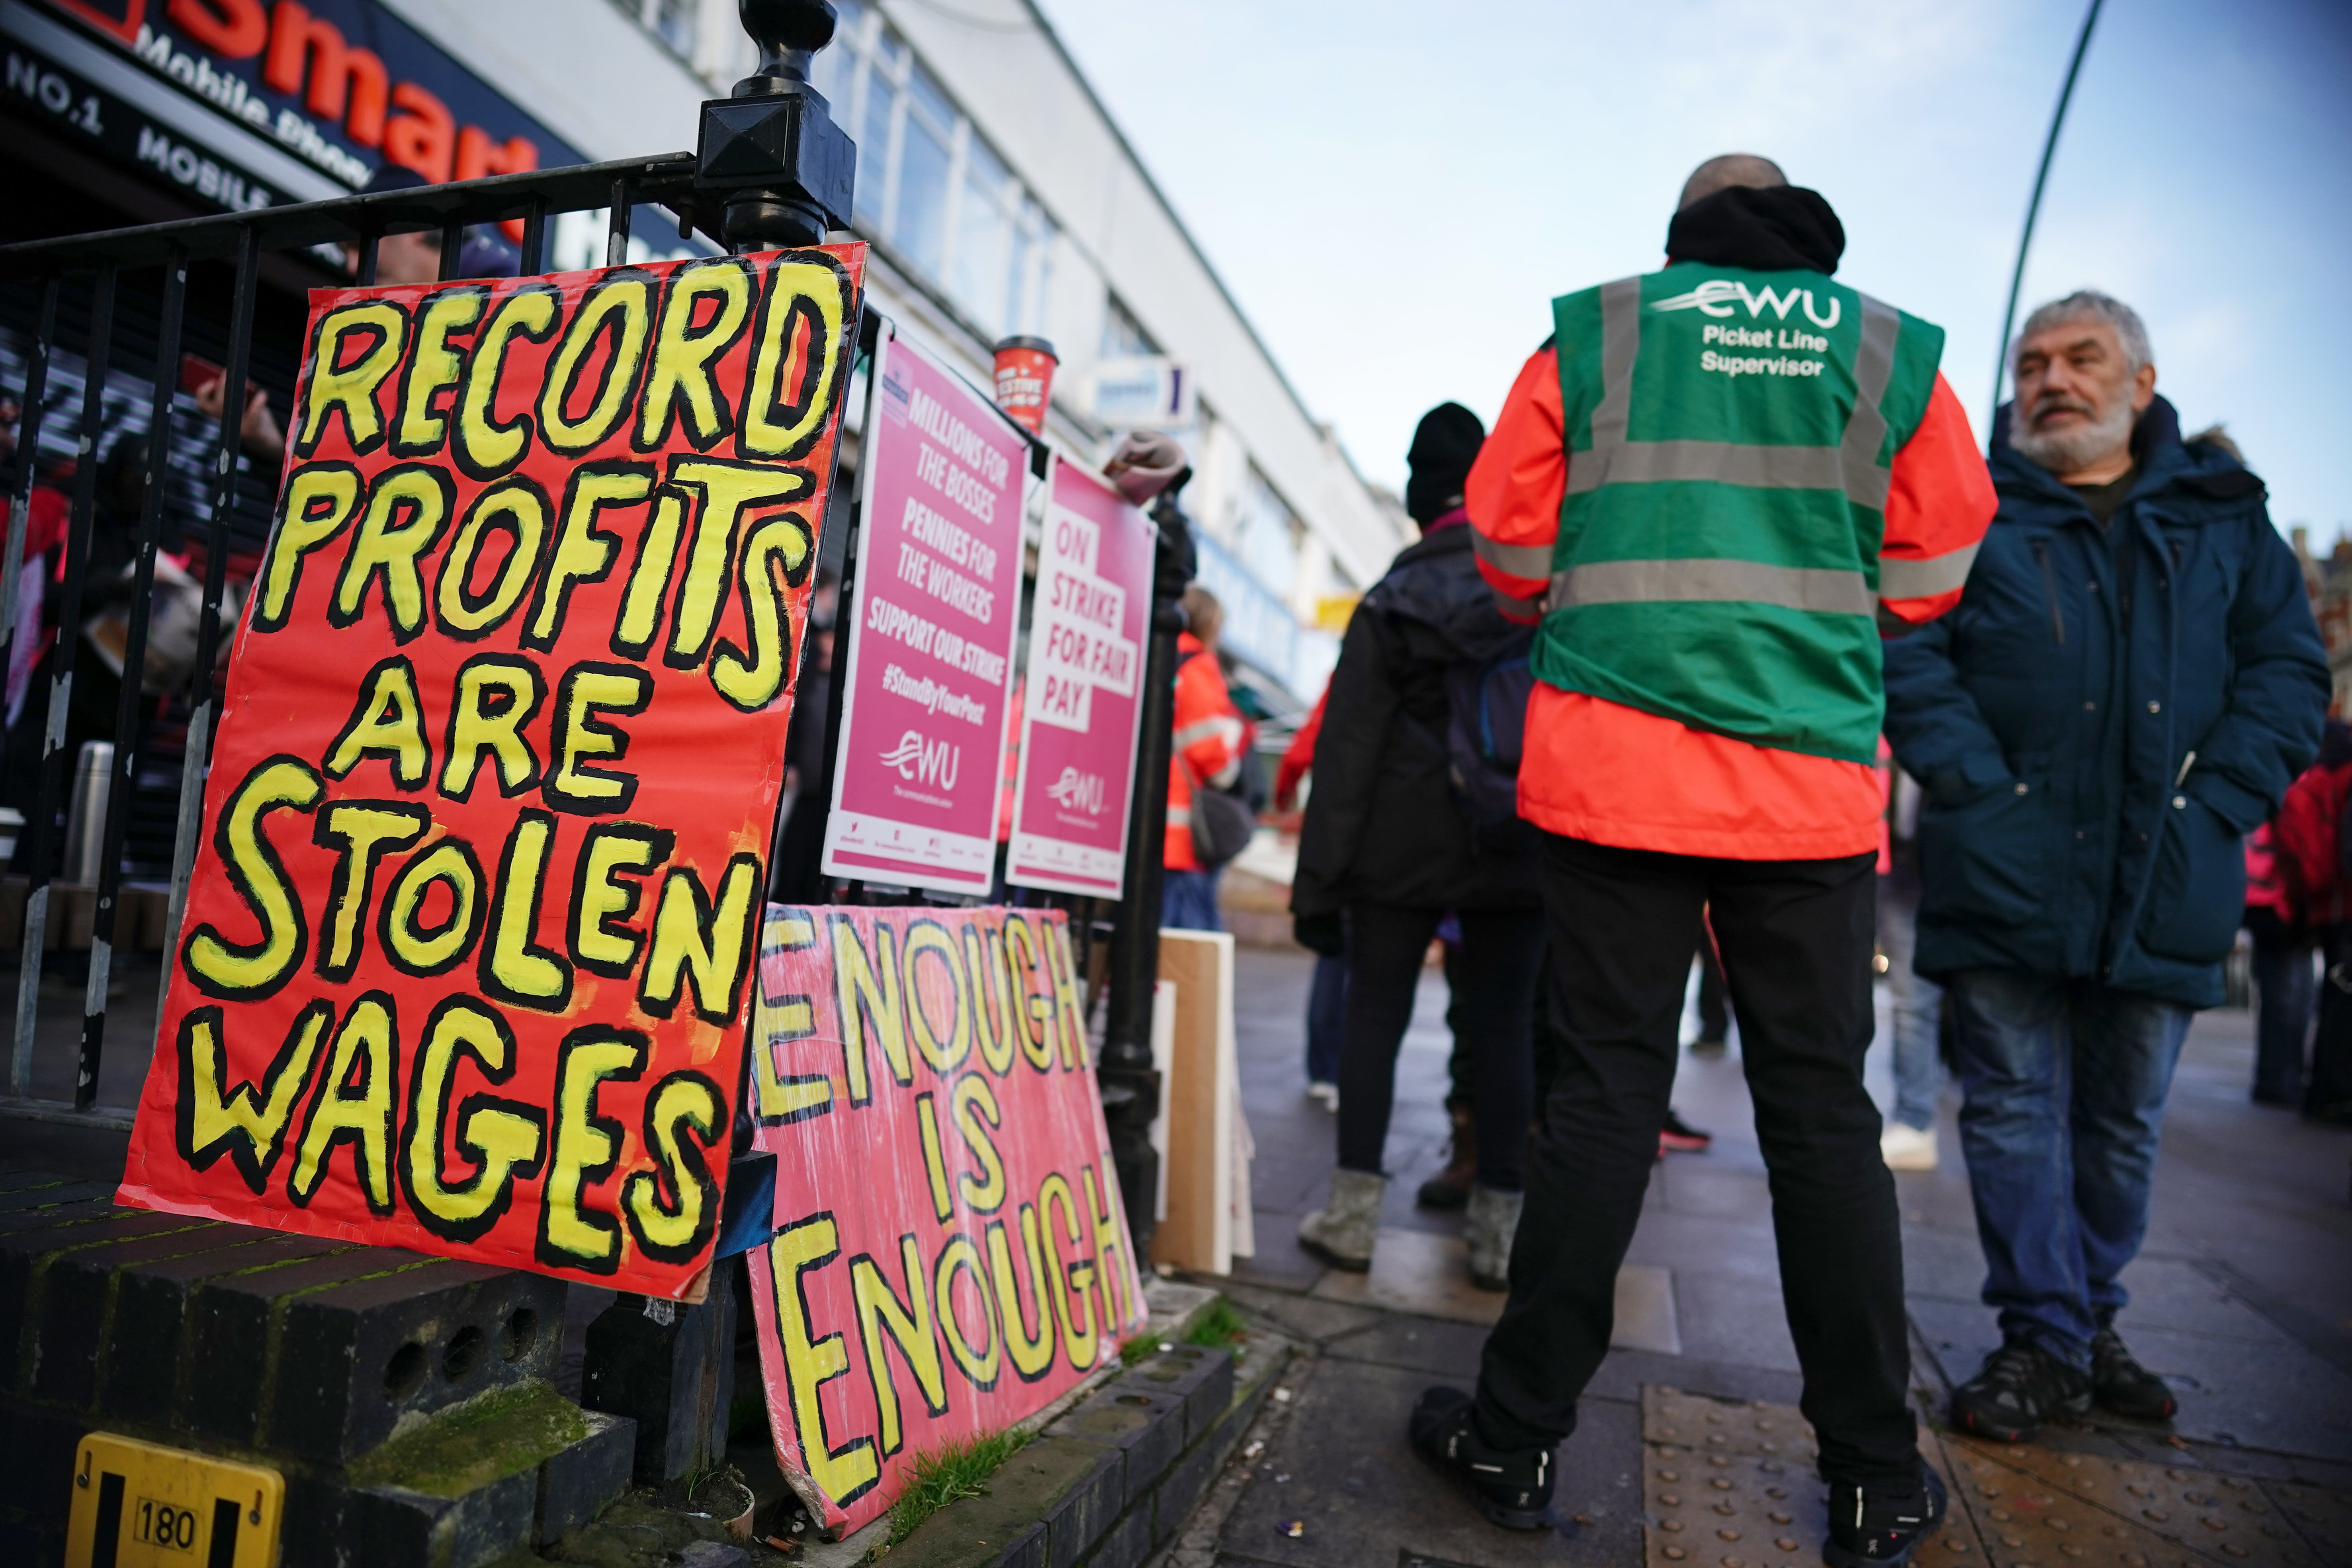 Postal workers on the picket line at the Kilburn Delivery Office in north west London. Members of the Communication Workers Union (CWU) are holding a 48-hour strike in a long-running dispute over jobs, pay and conditions (Aaron Chown/PA)